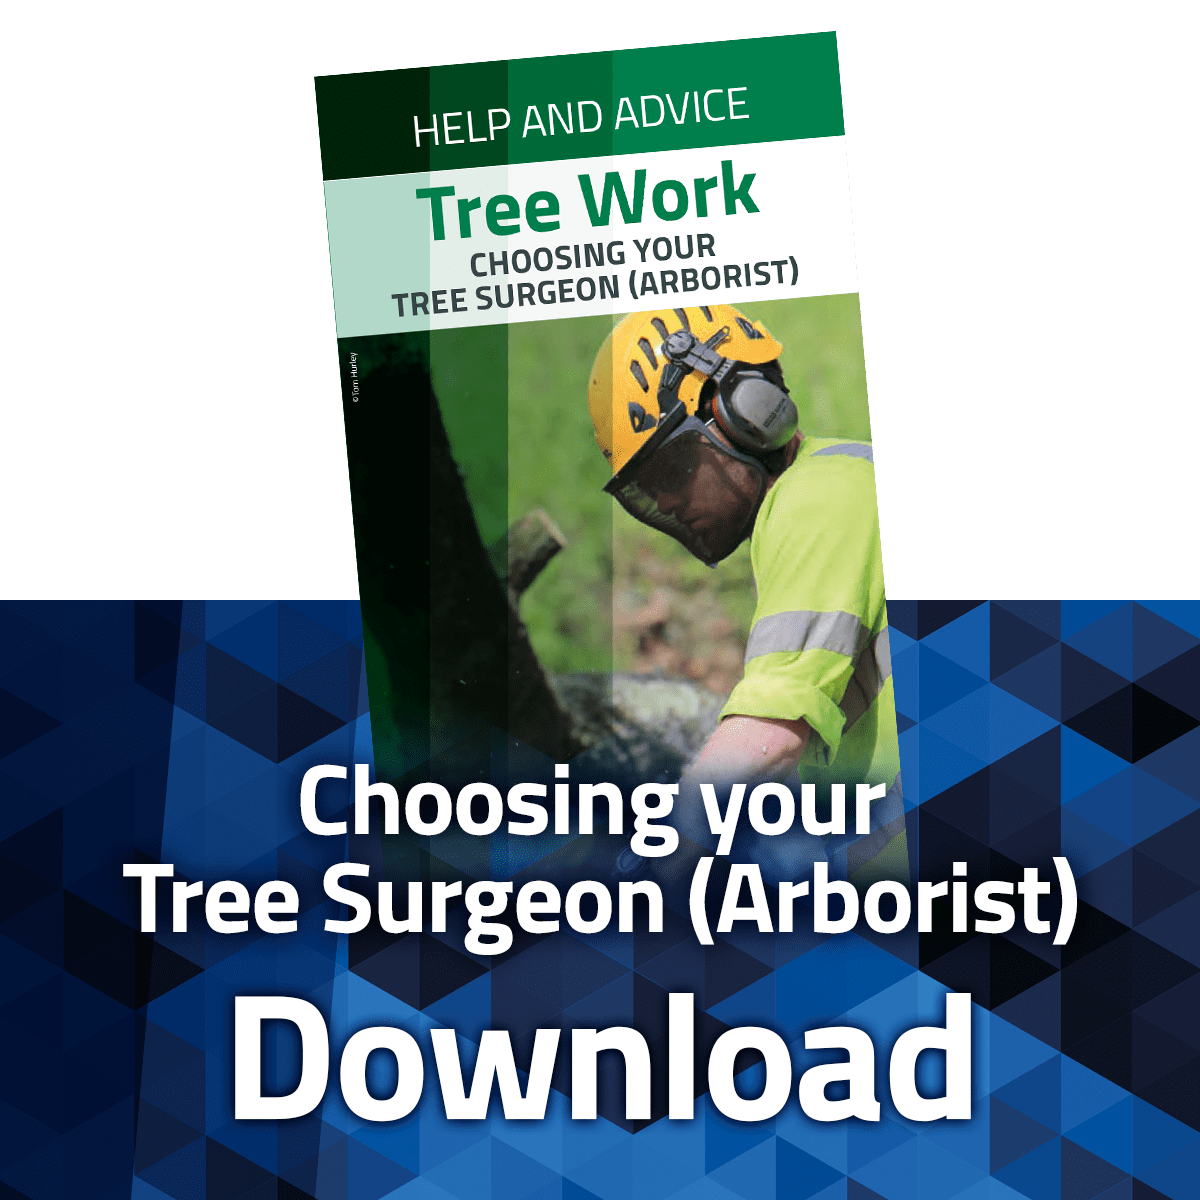 Download the Choosing Your Arborist Leaflet